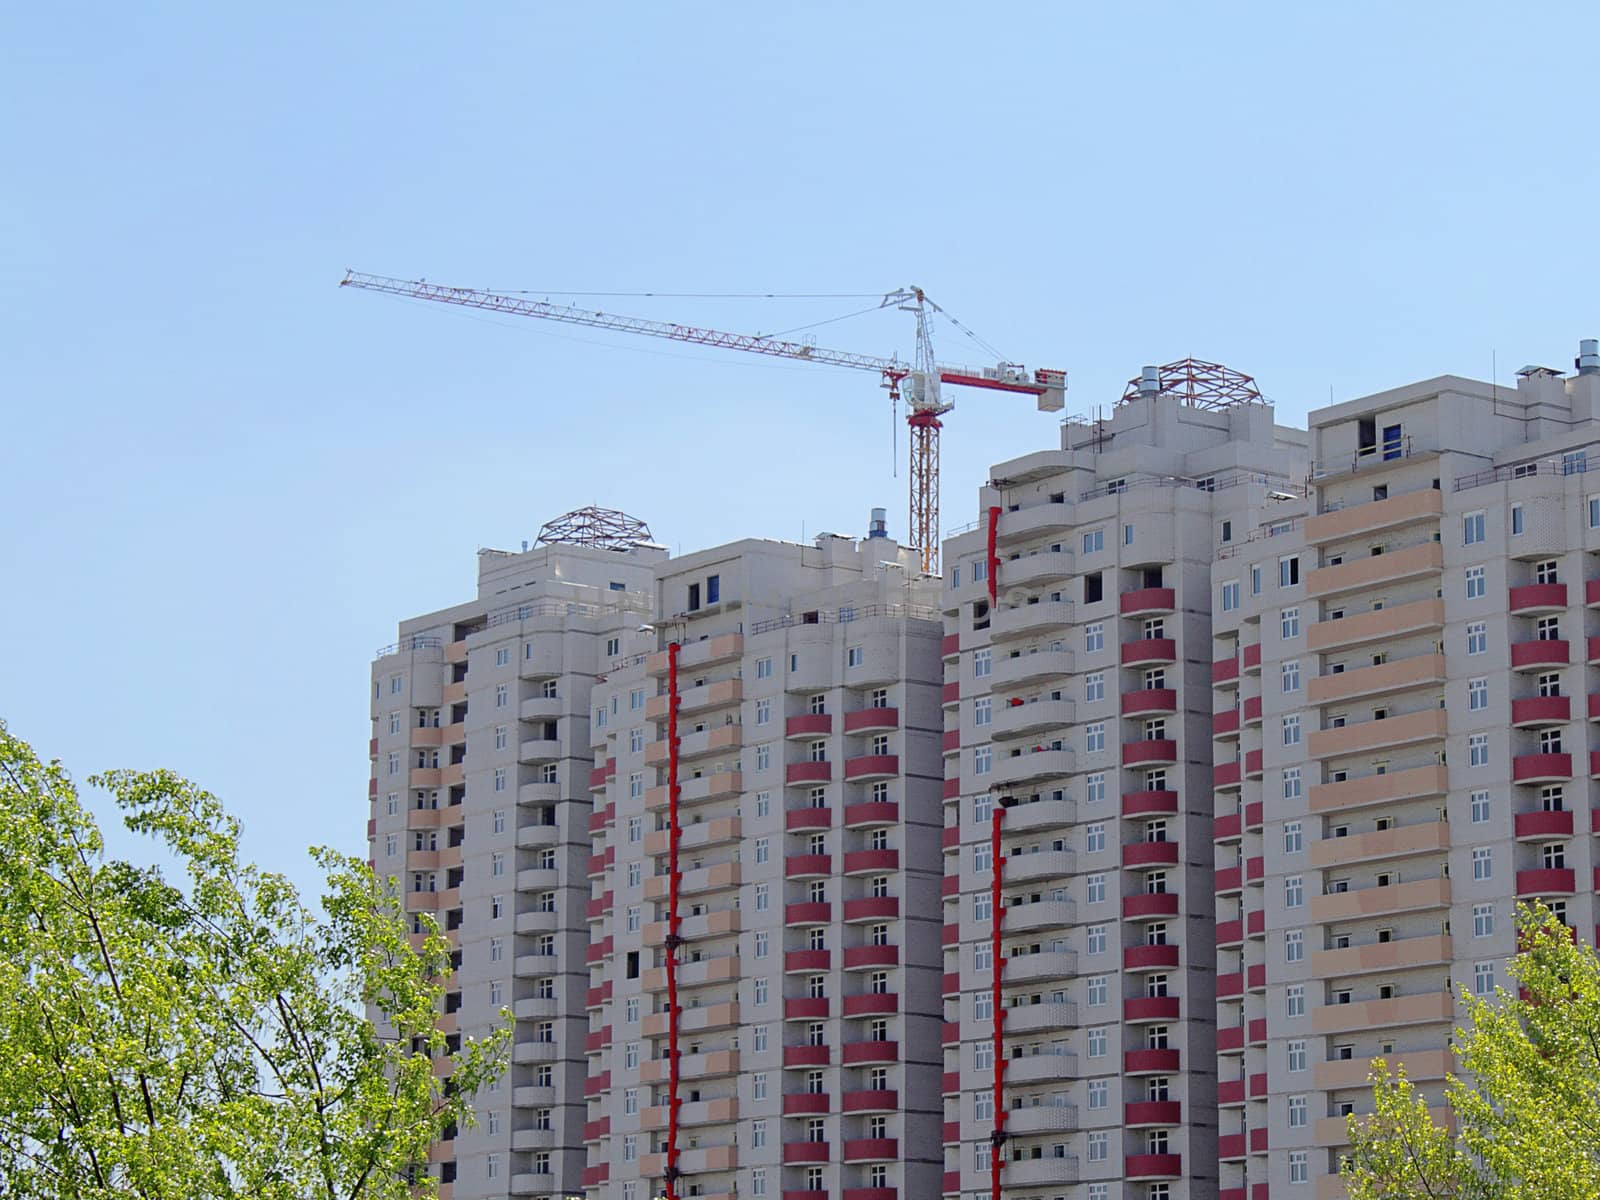 Apartment house under construction with a building crane